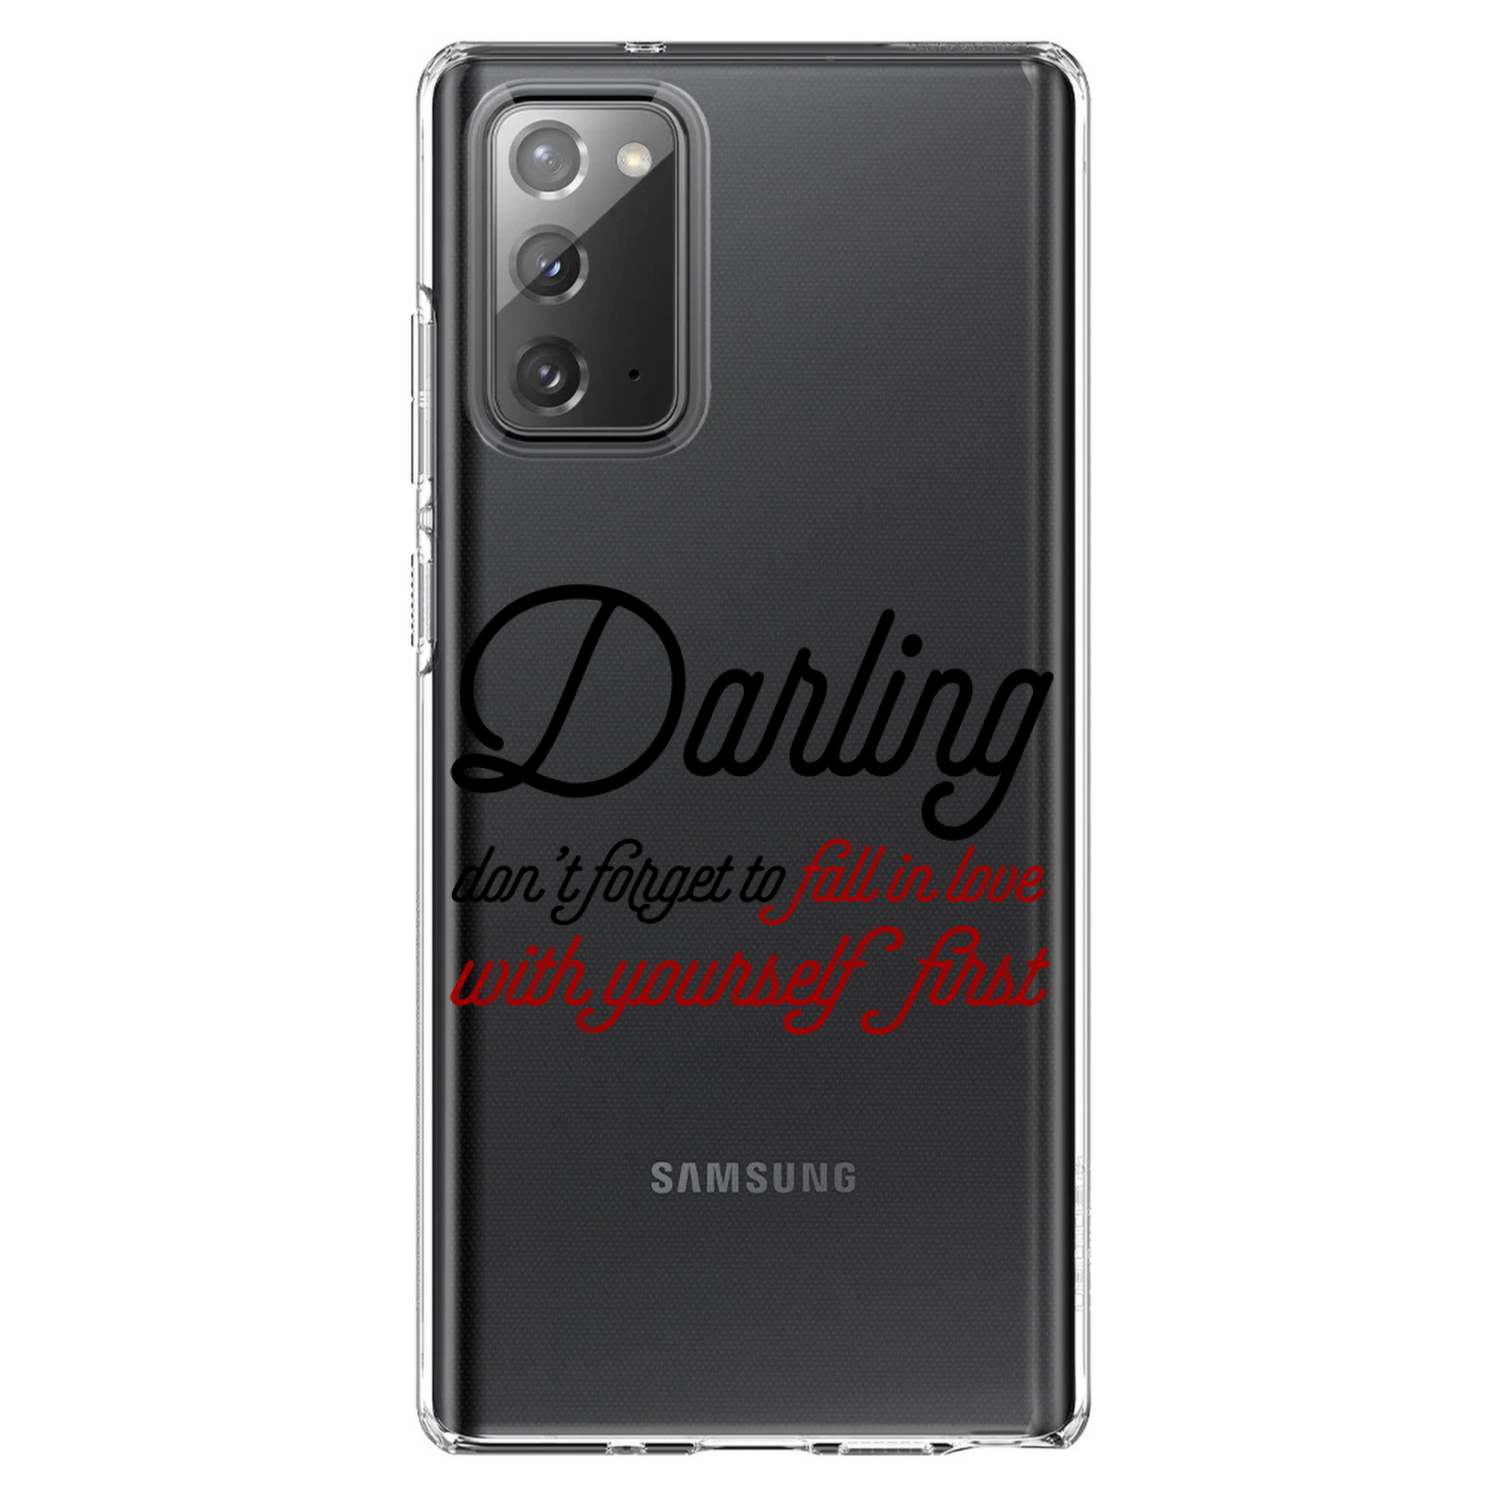 DistinctInk Clear Shockproof Hybrid Case for Galaxy Note 20 ULTRA (6.9" Screen) - TPU Bumper Acrylic Back Tempered Glass Screen Protector - Darling Don't Forget to Fall In Love with Yourself - image 1 of 3